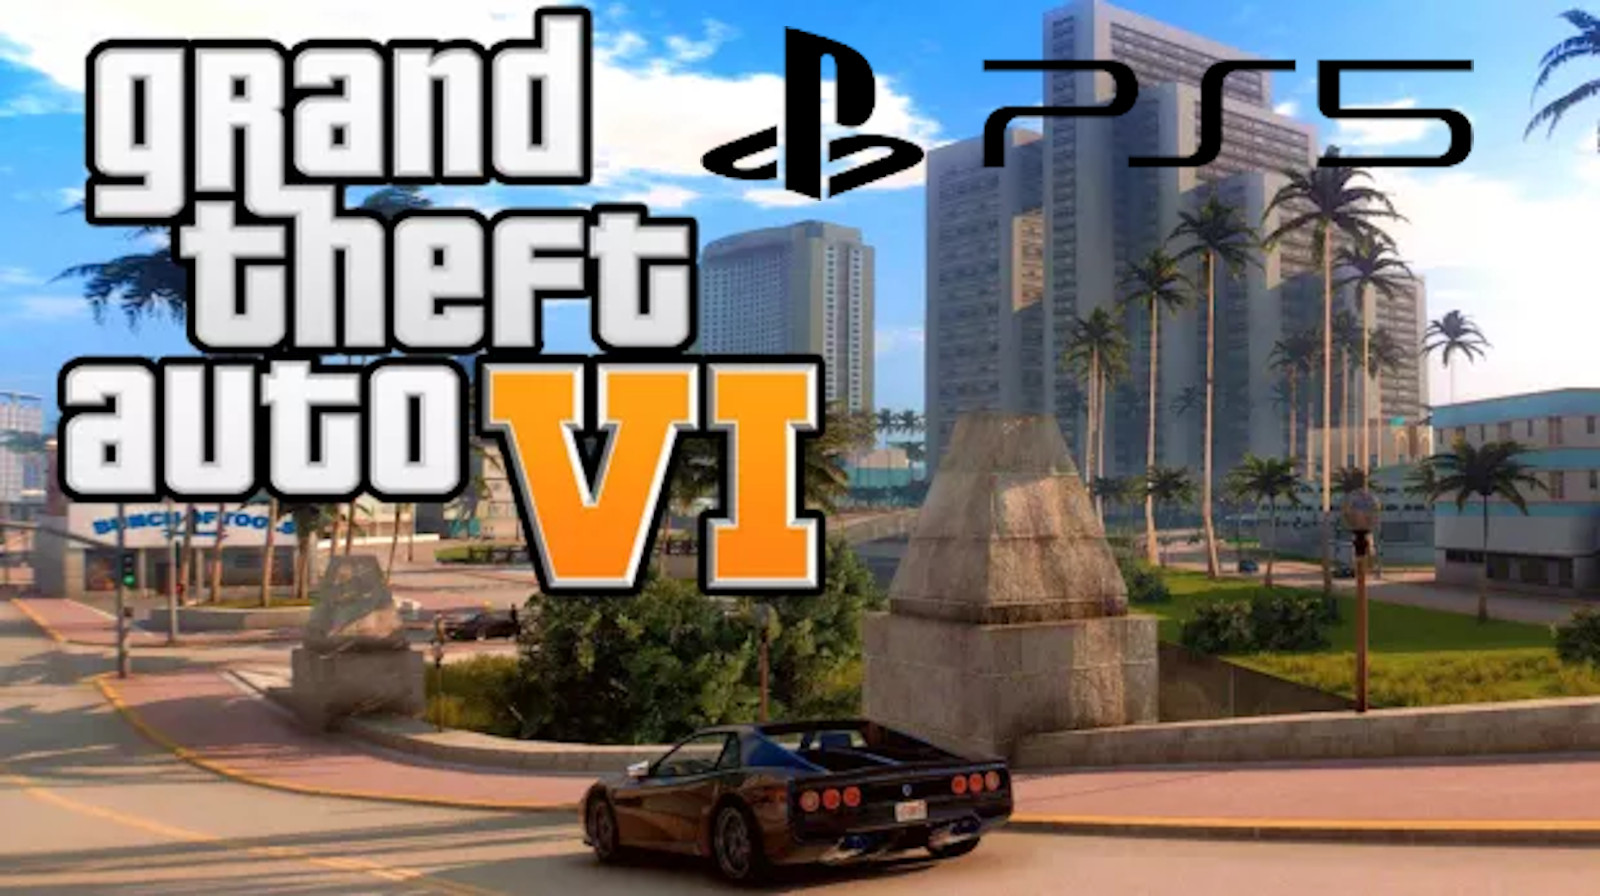 New rumor claims Sony wants GTA 6 to be a timed PS5 exclusive - Dexerto